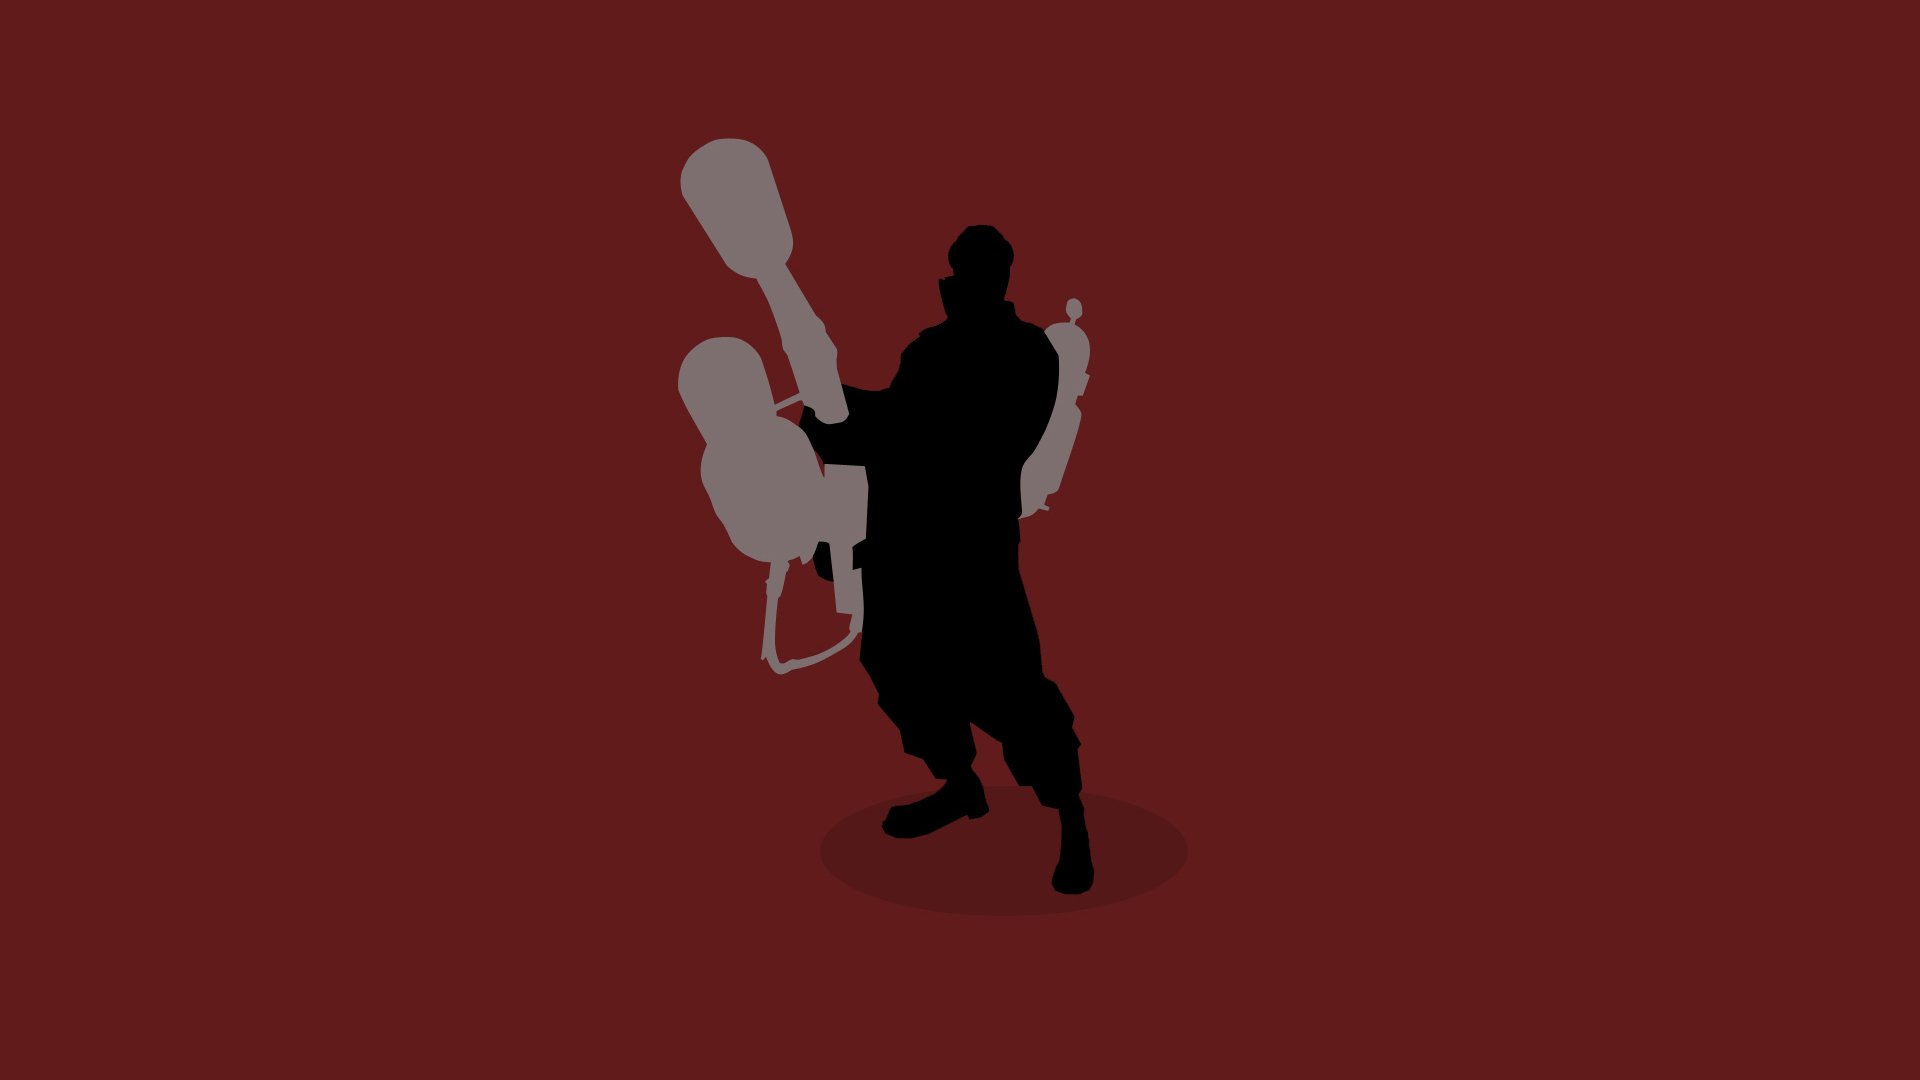 1920x1080 team fortress 2 image